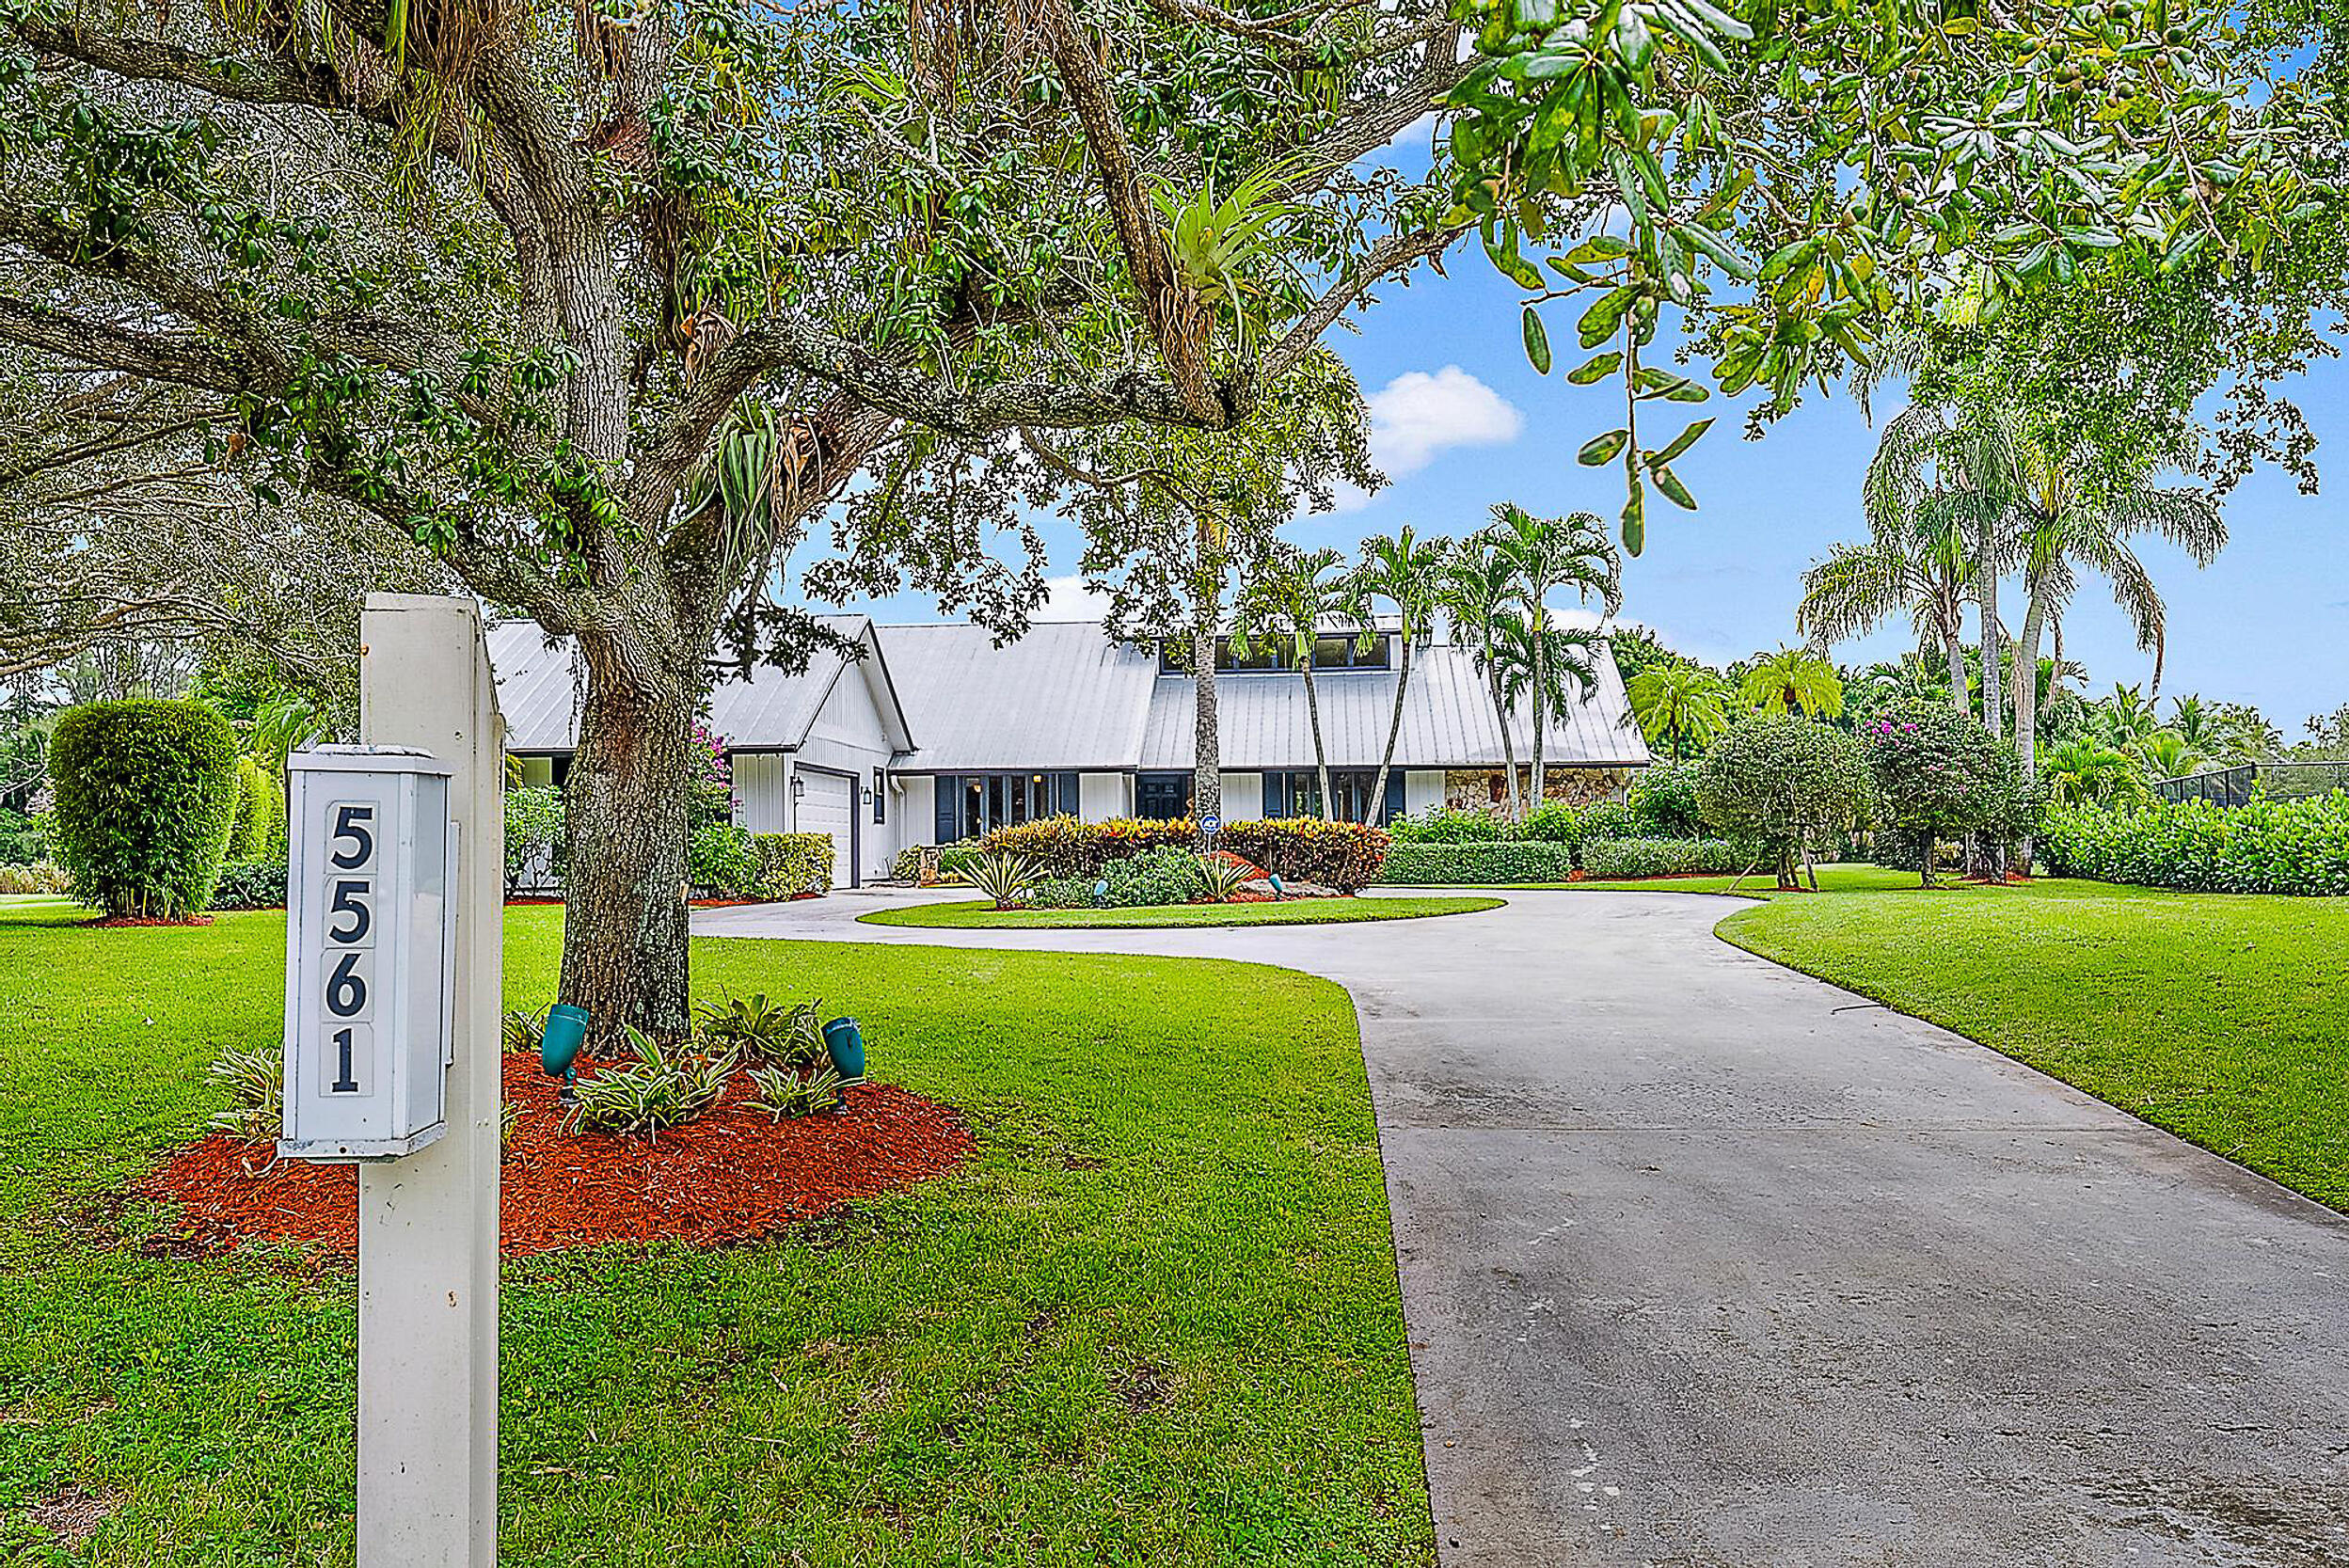 5561 Whirlaway Road, Palm Beach Gardens, Palm Beach County, Florida - 6 Bedrooms  
3.5 Bathrooms - 